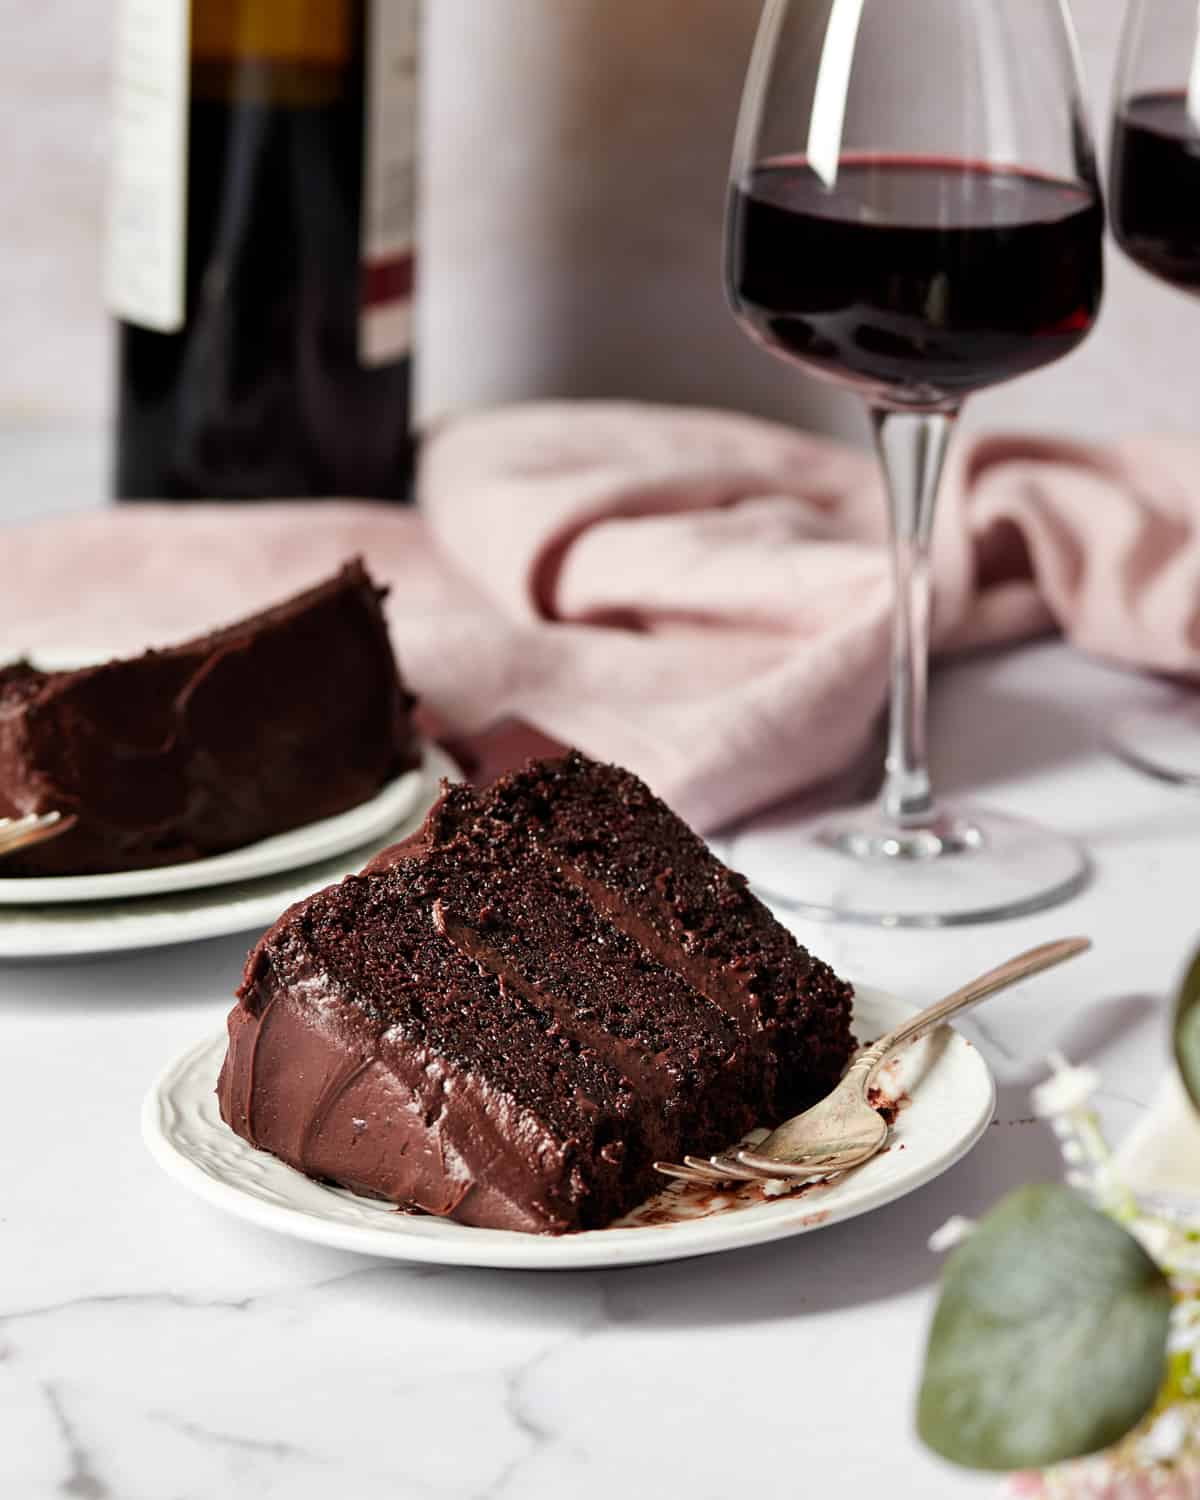 two slices of red wine chocolate cake with a glass and bottle of red wine.